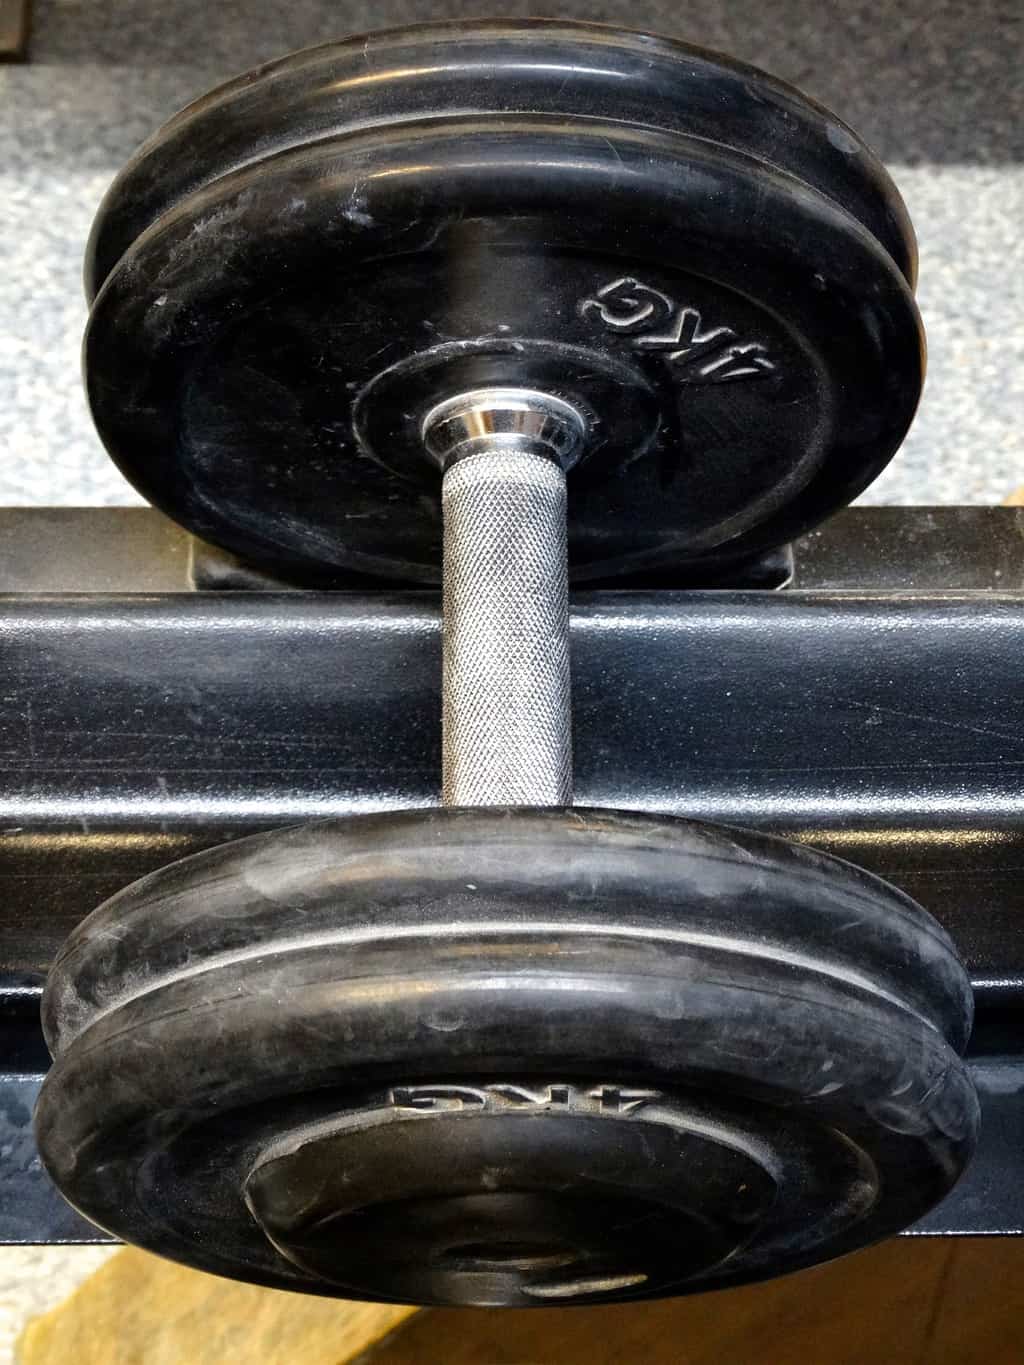 4kg dumbbell placed on a rack